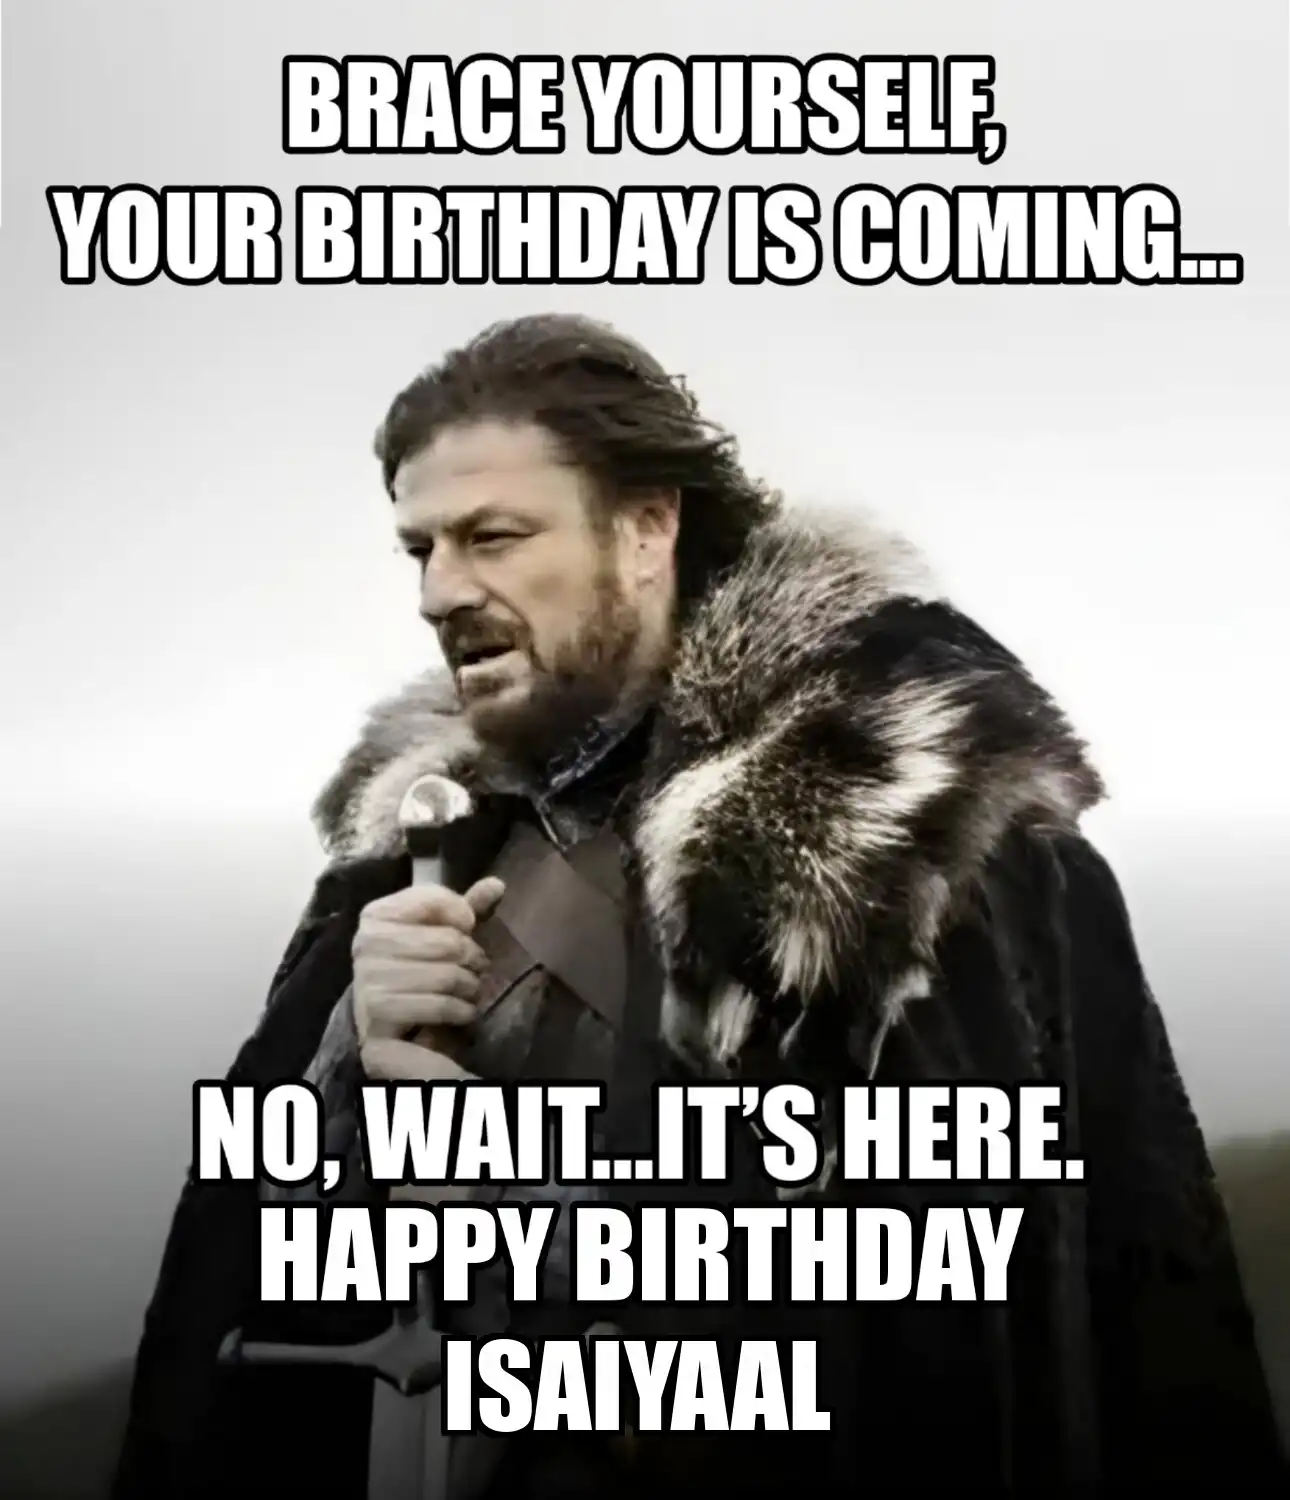 Happy Birthday Isaiyaal Brace Yourself Your Birthday Is Coming Meme